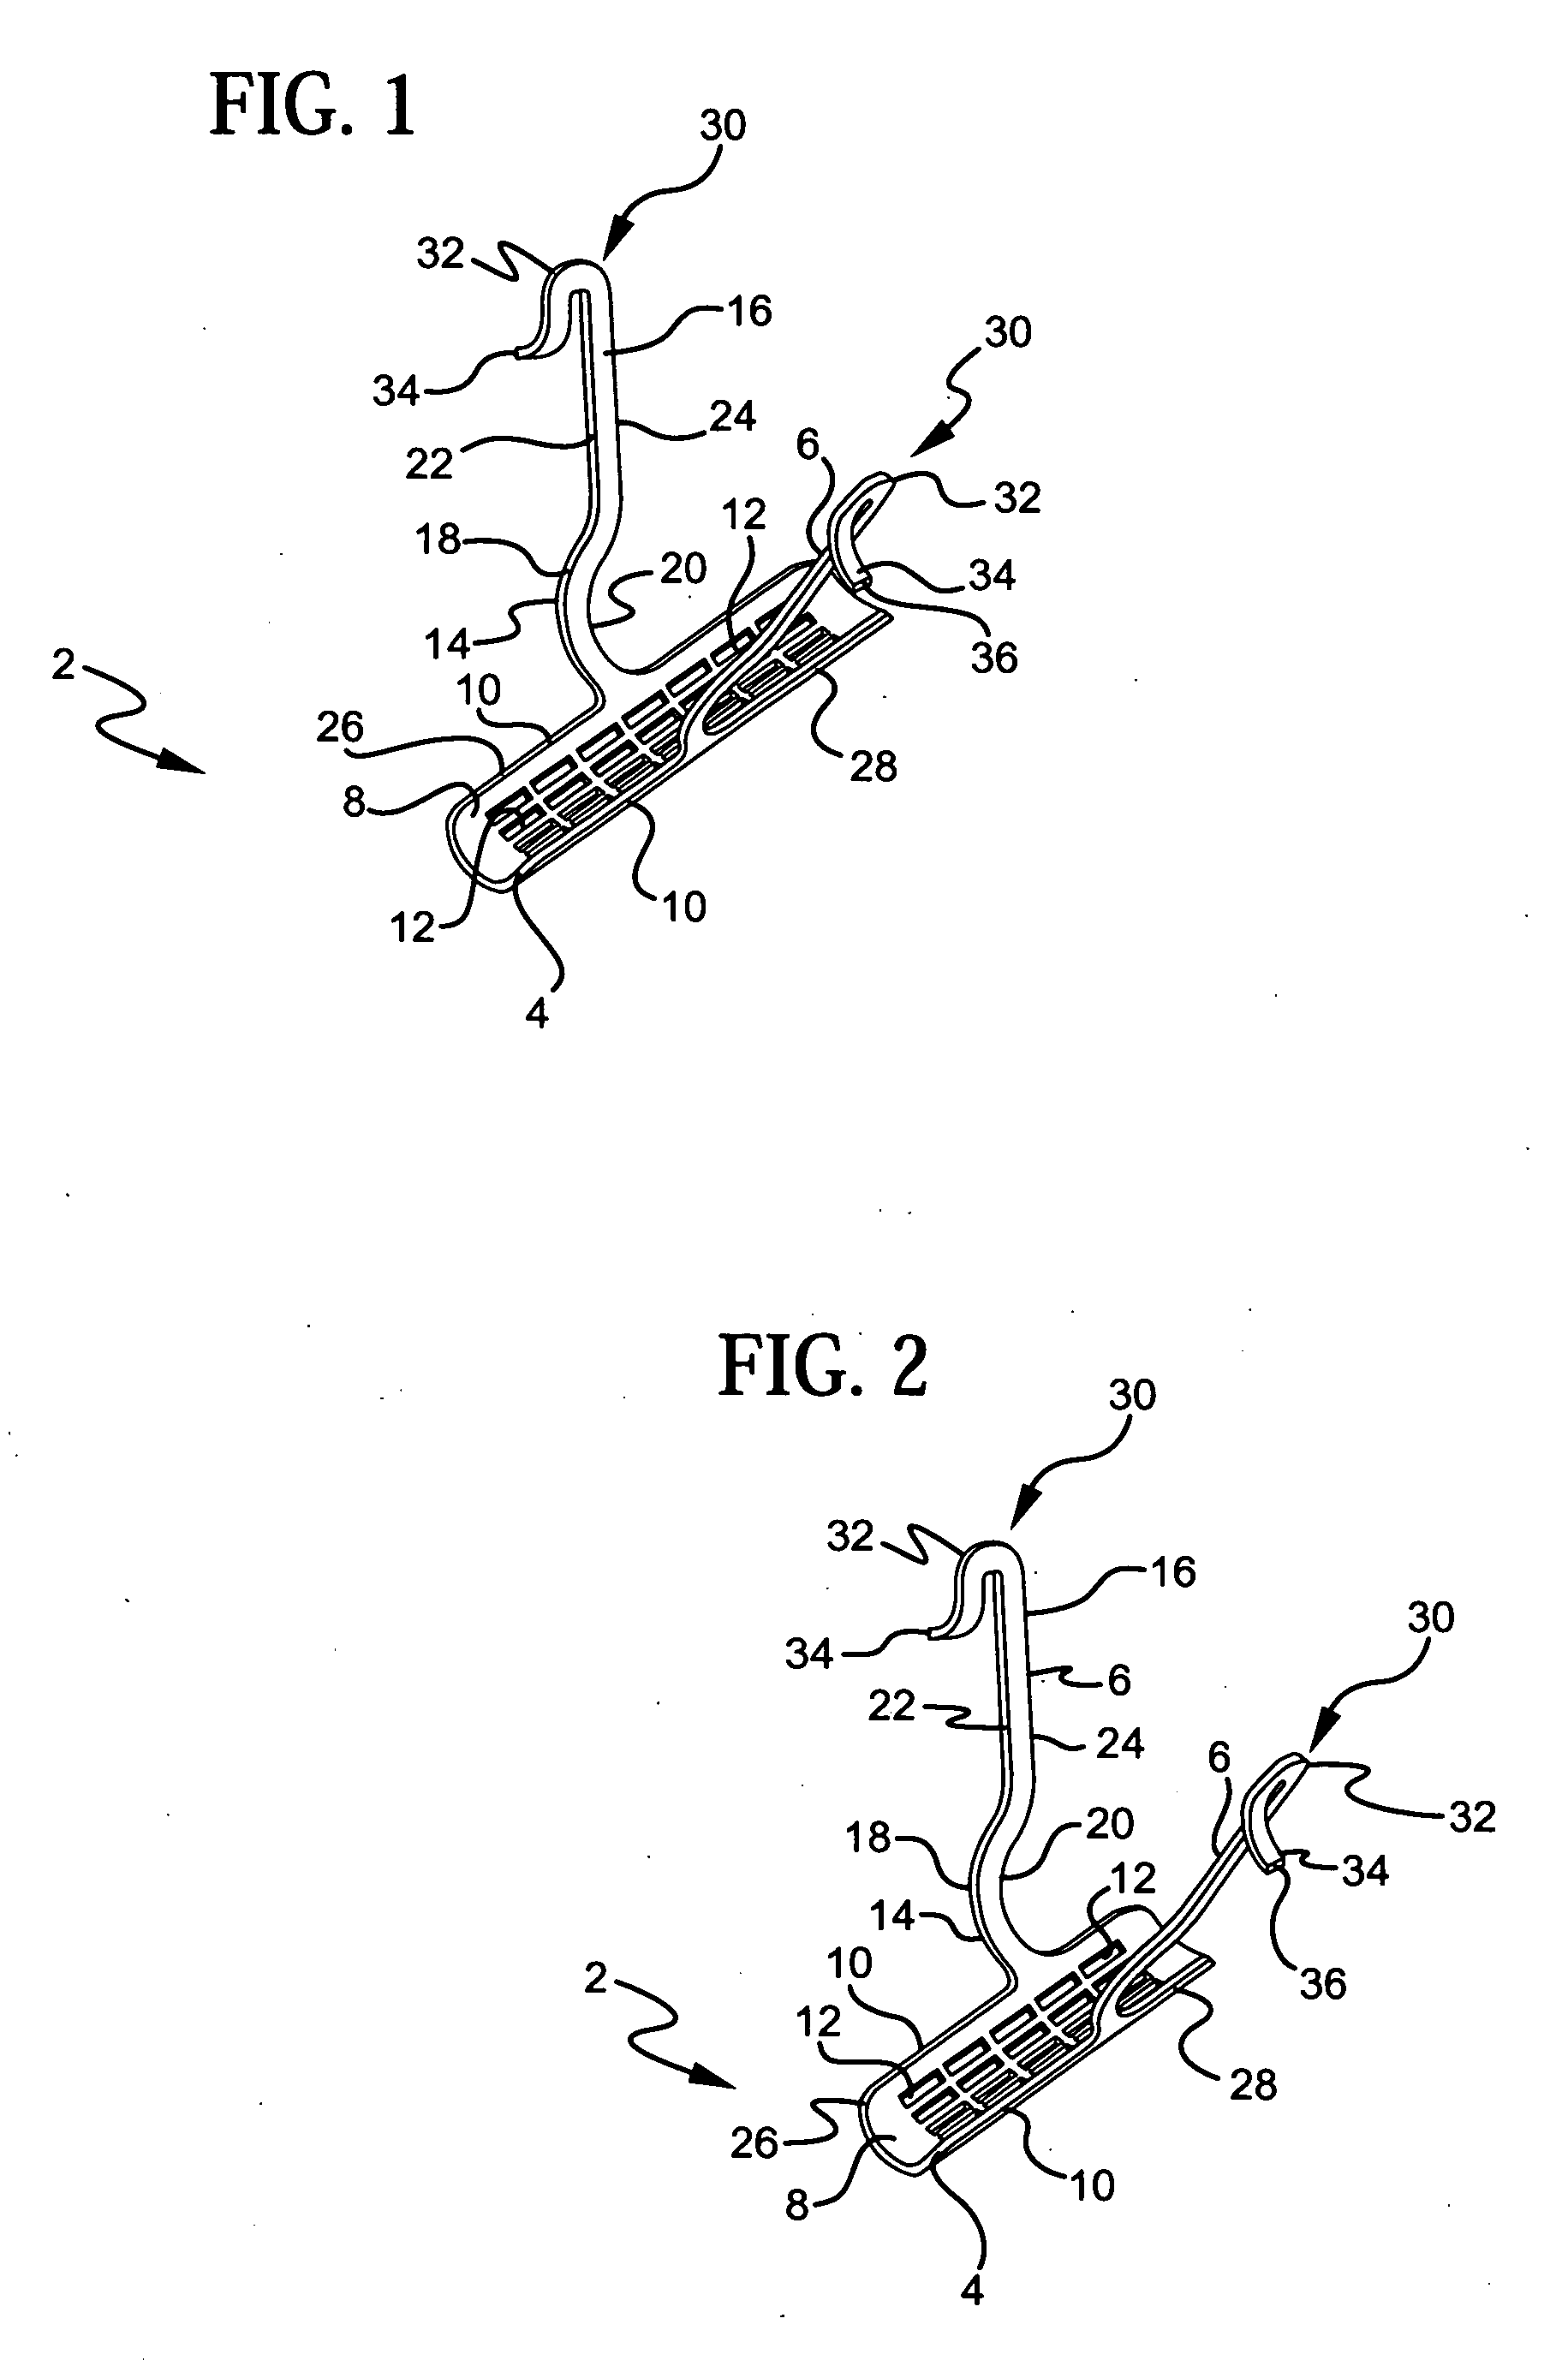 Stress urinary incontinence implant and device for deploying same